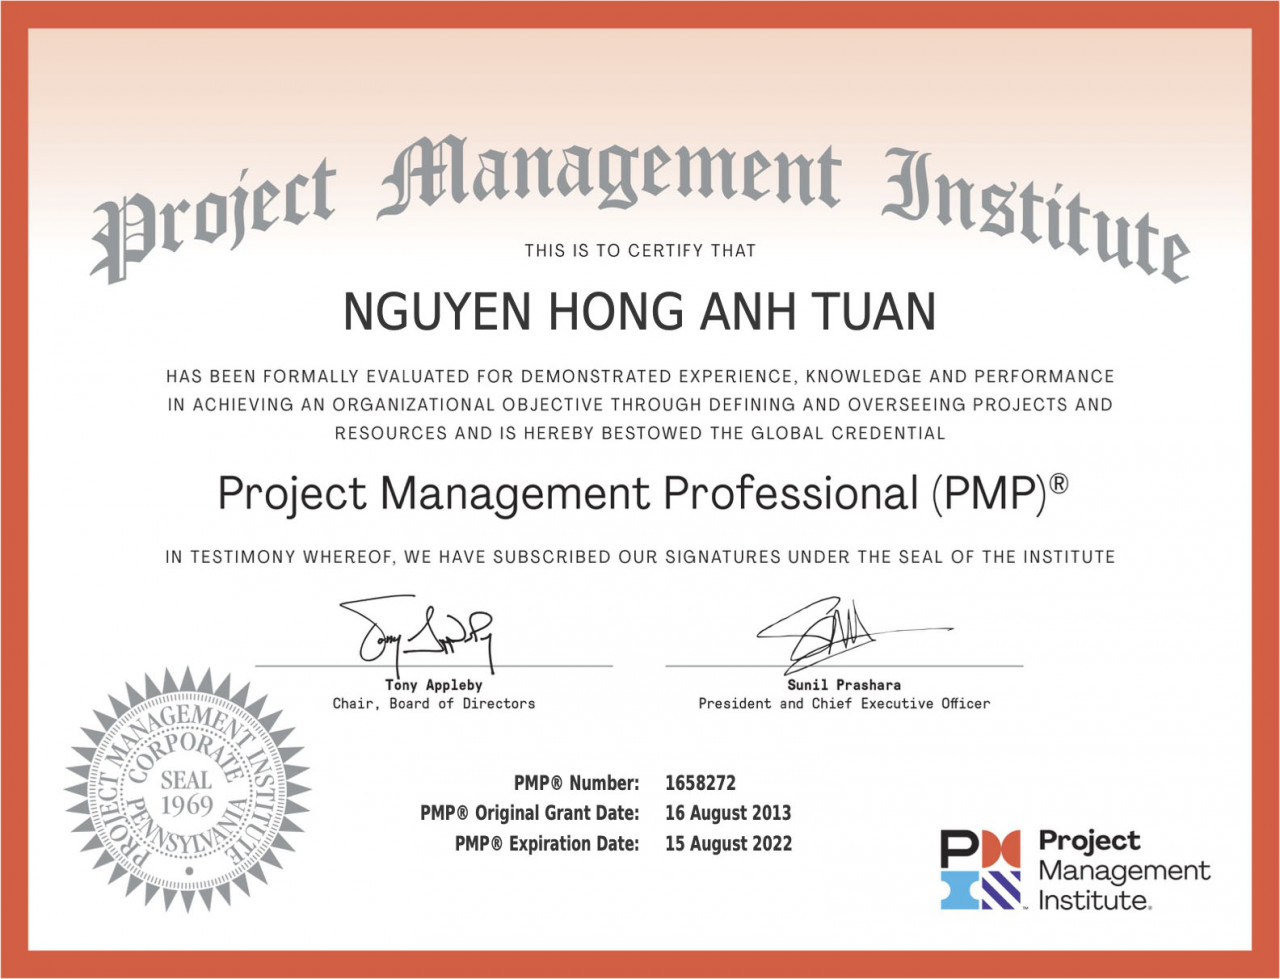 Nguyen Hong Anh Tuan Project Management Body of Knowledge Certificate